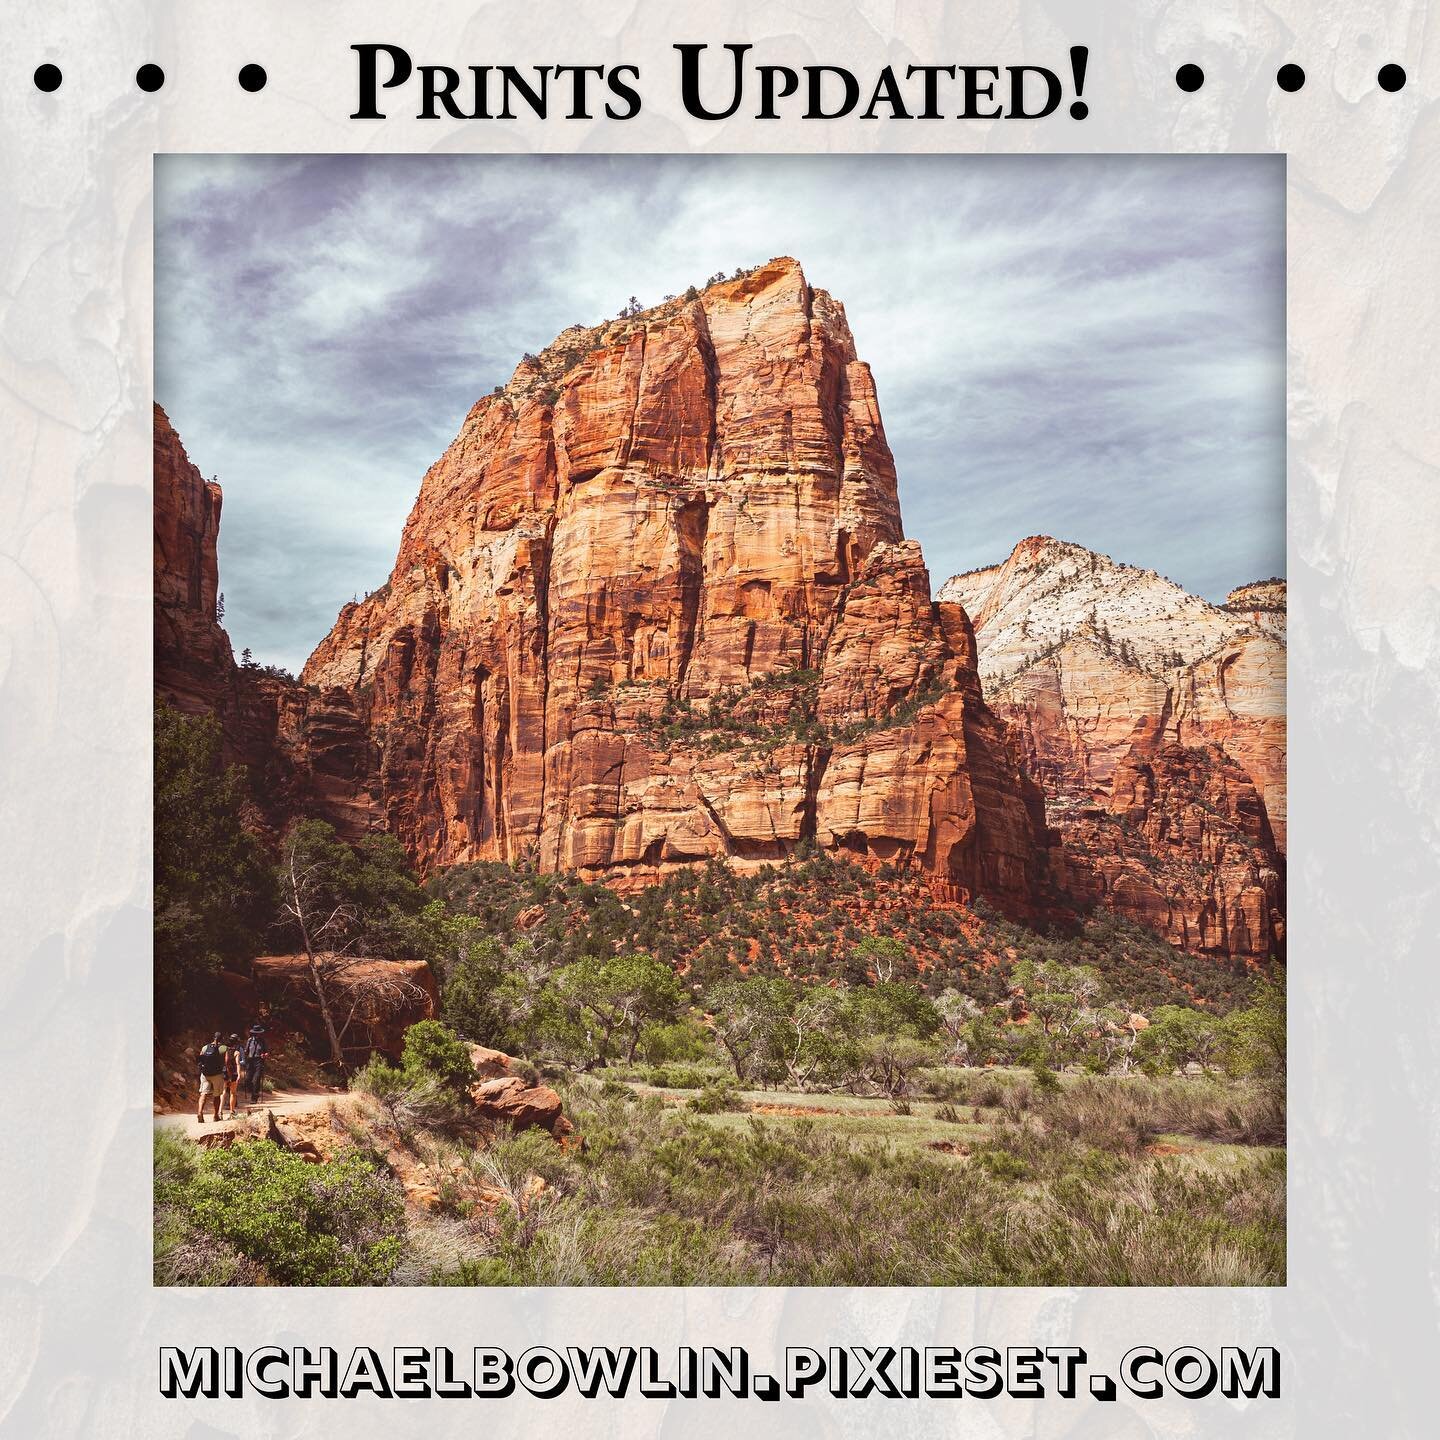 My print store has been updated! Check out the link in my for all the photos from our Utah adventure!
.
.
.
.
.

#angelslanding #zion #zionnationalpark #landscapephotography #landscape #pennsylvaniaisbeautiful #brycecanyonnationalpark #brycecanyon #p